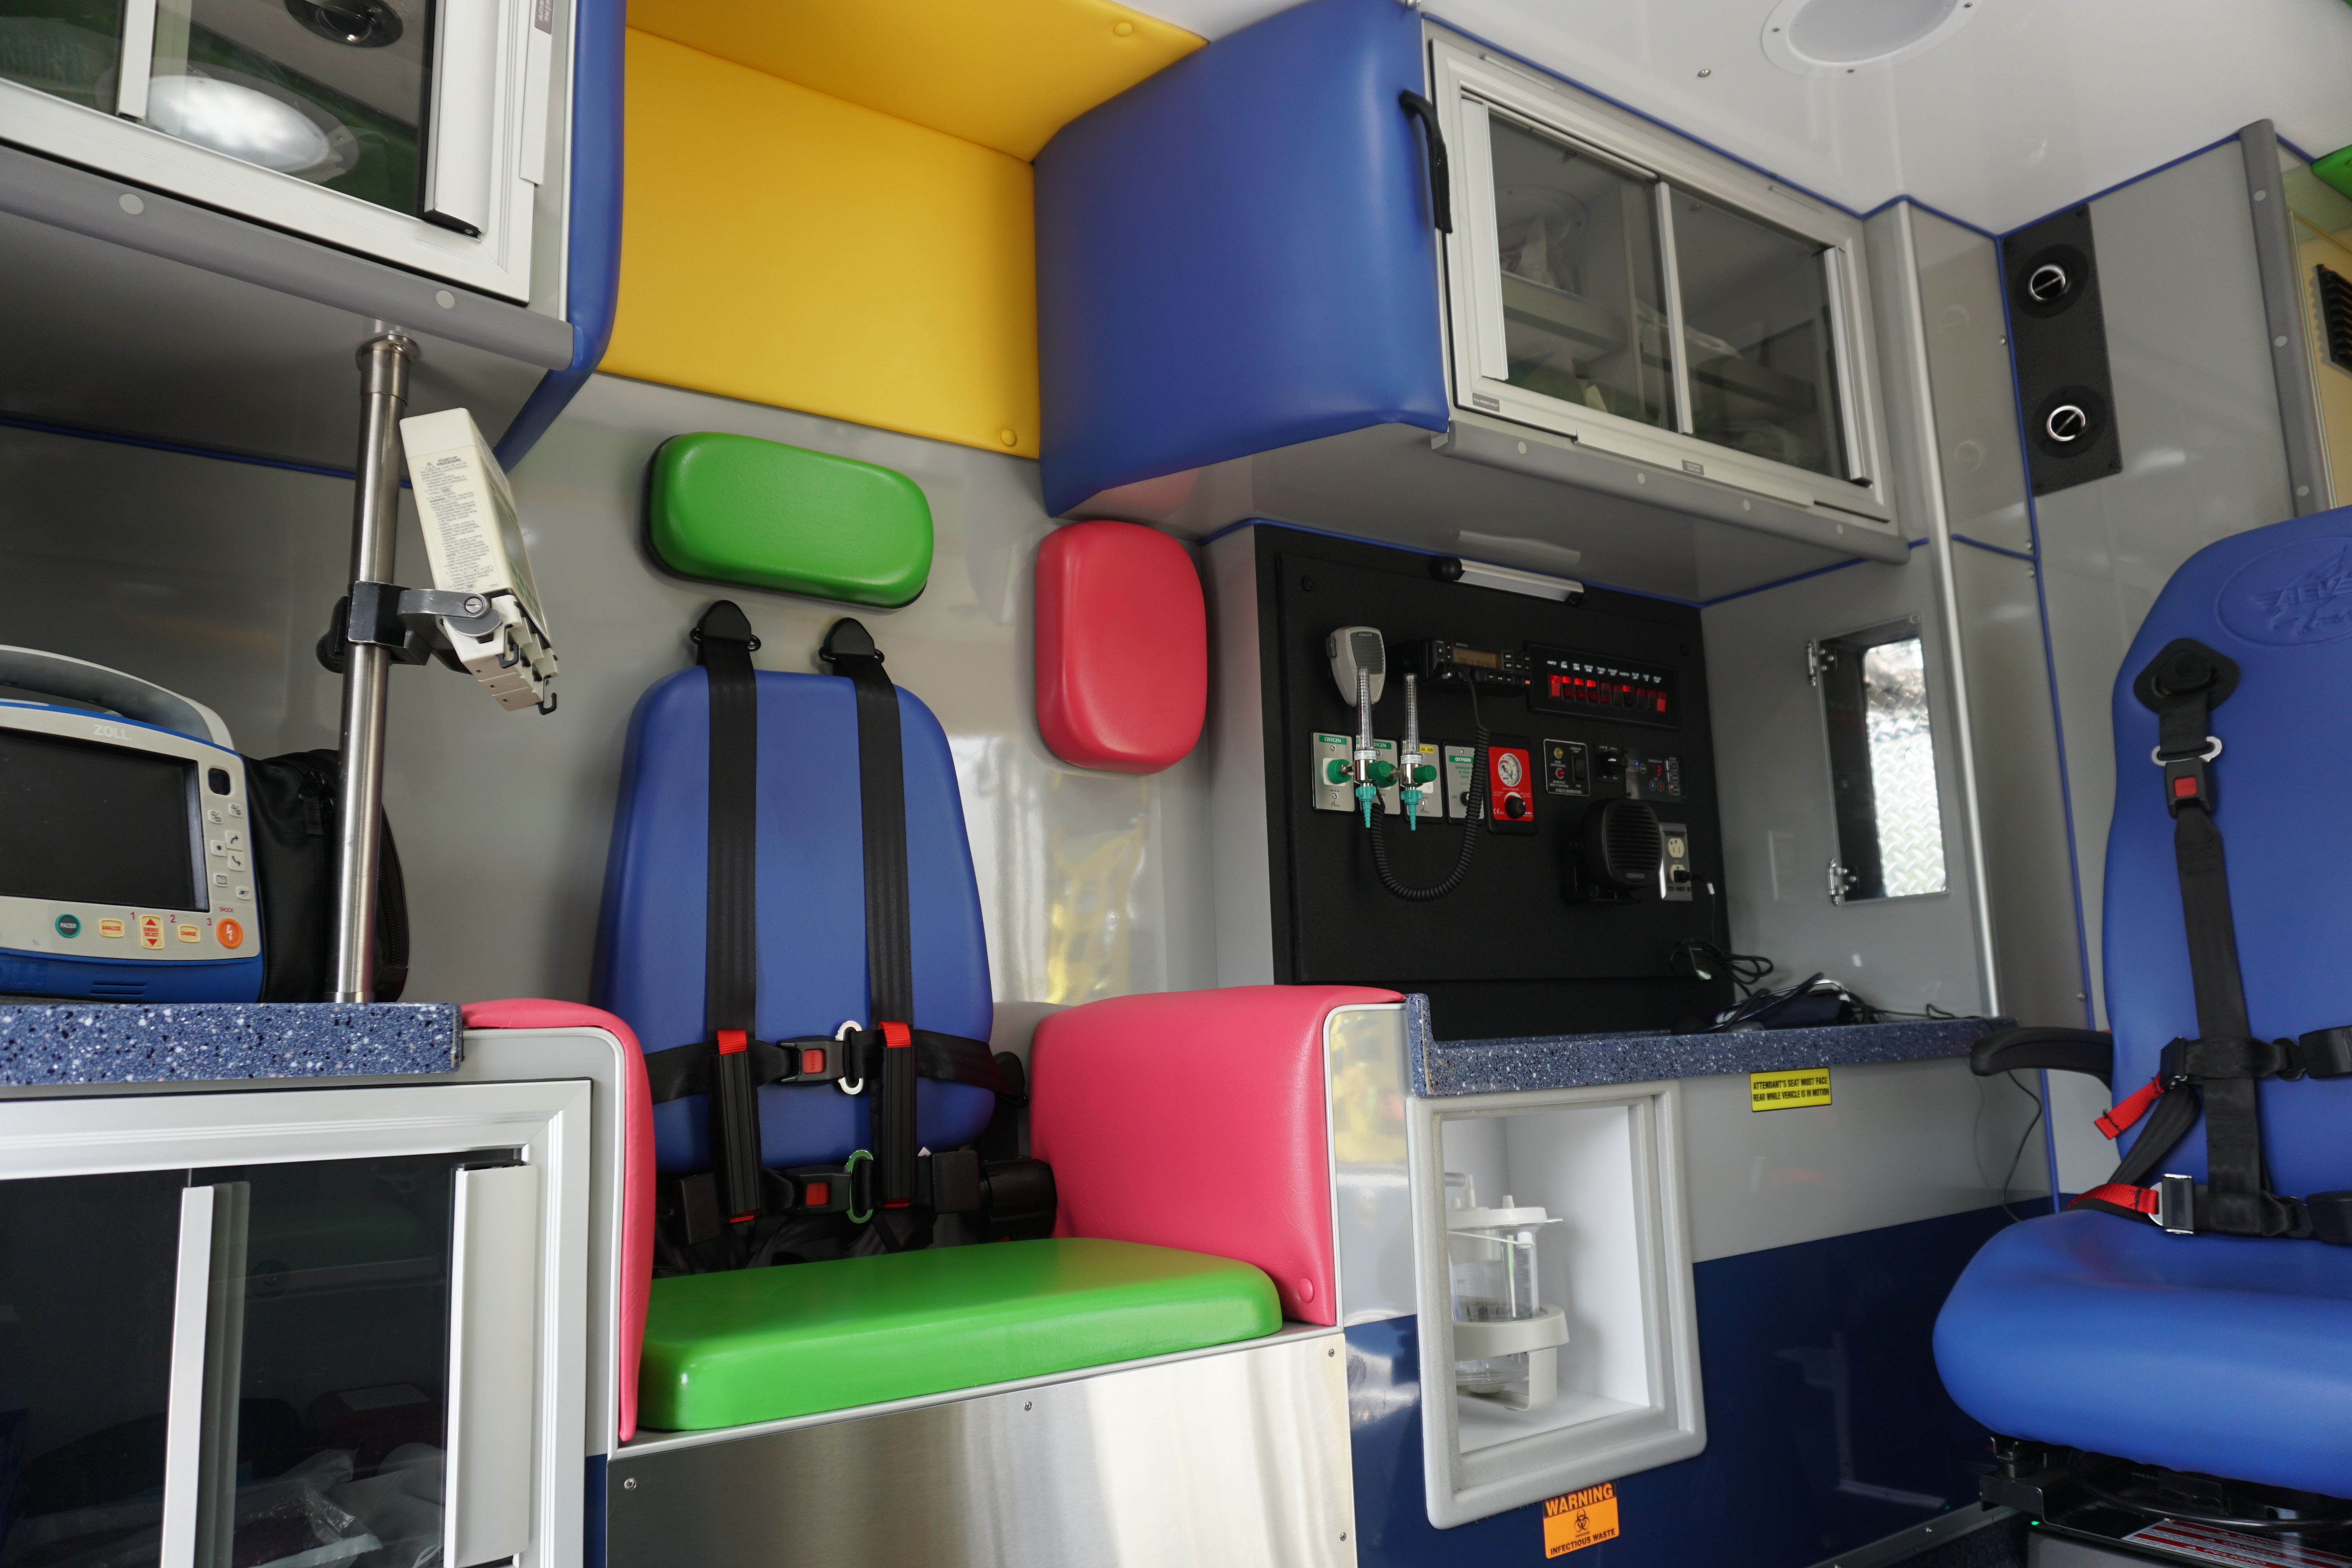 An image of the inside of the WVU Children's ambulance by HealthTeam Critical Care Transport